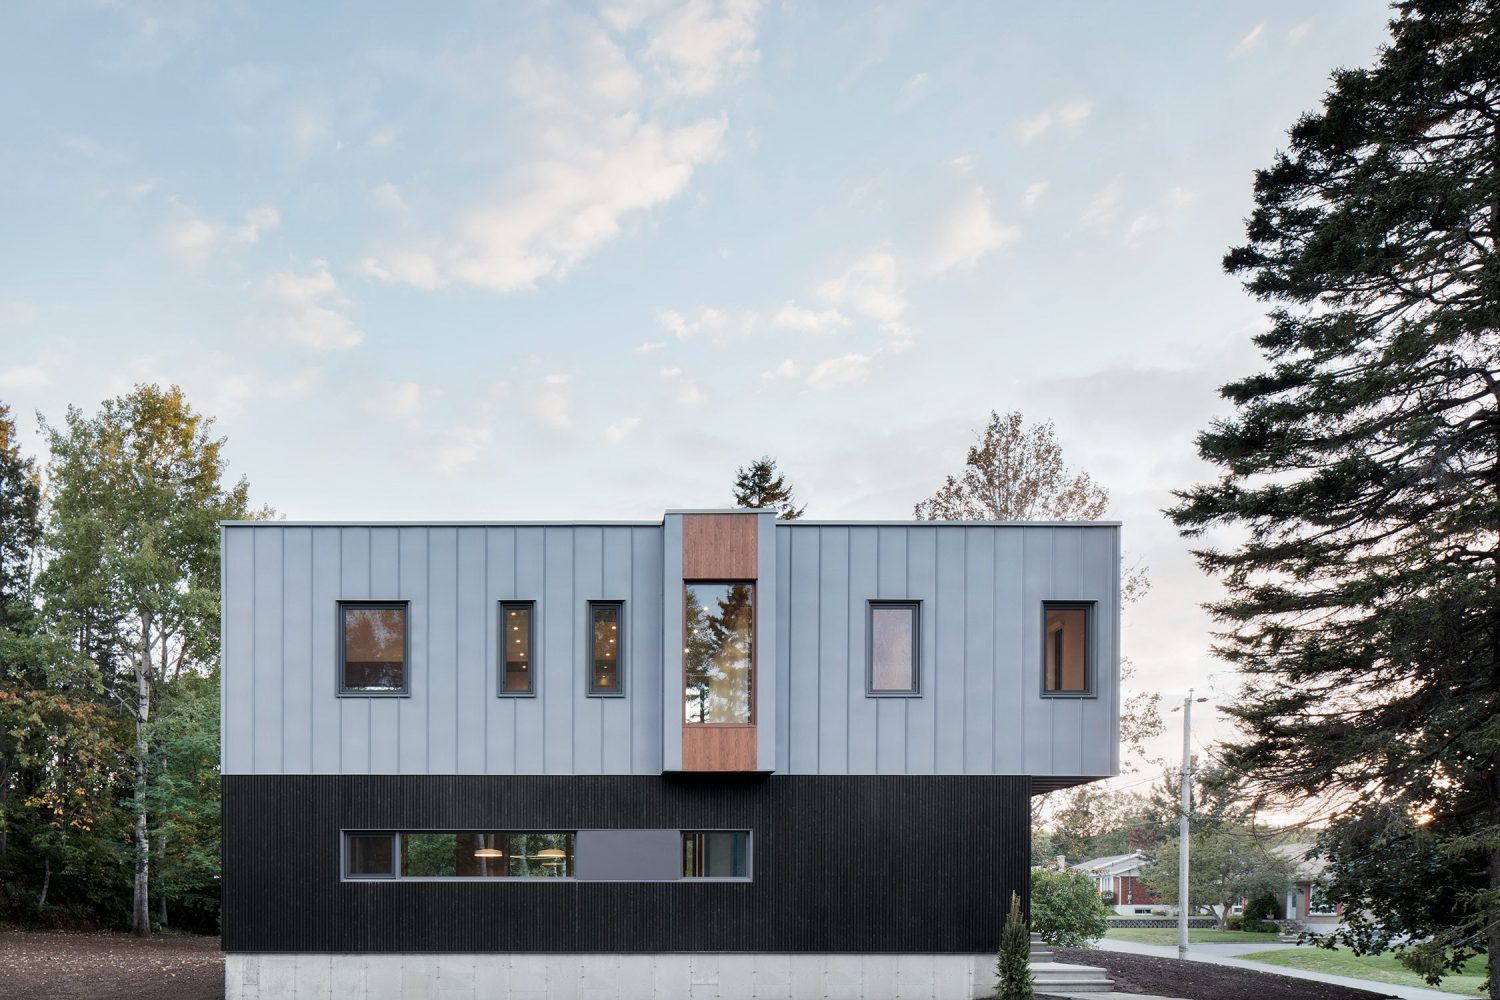 Bic Residence by NatureHumaine